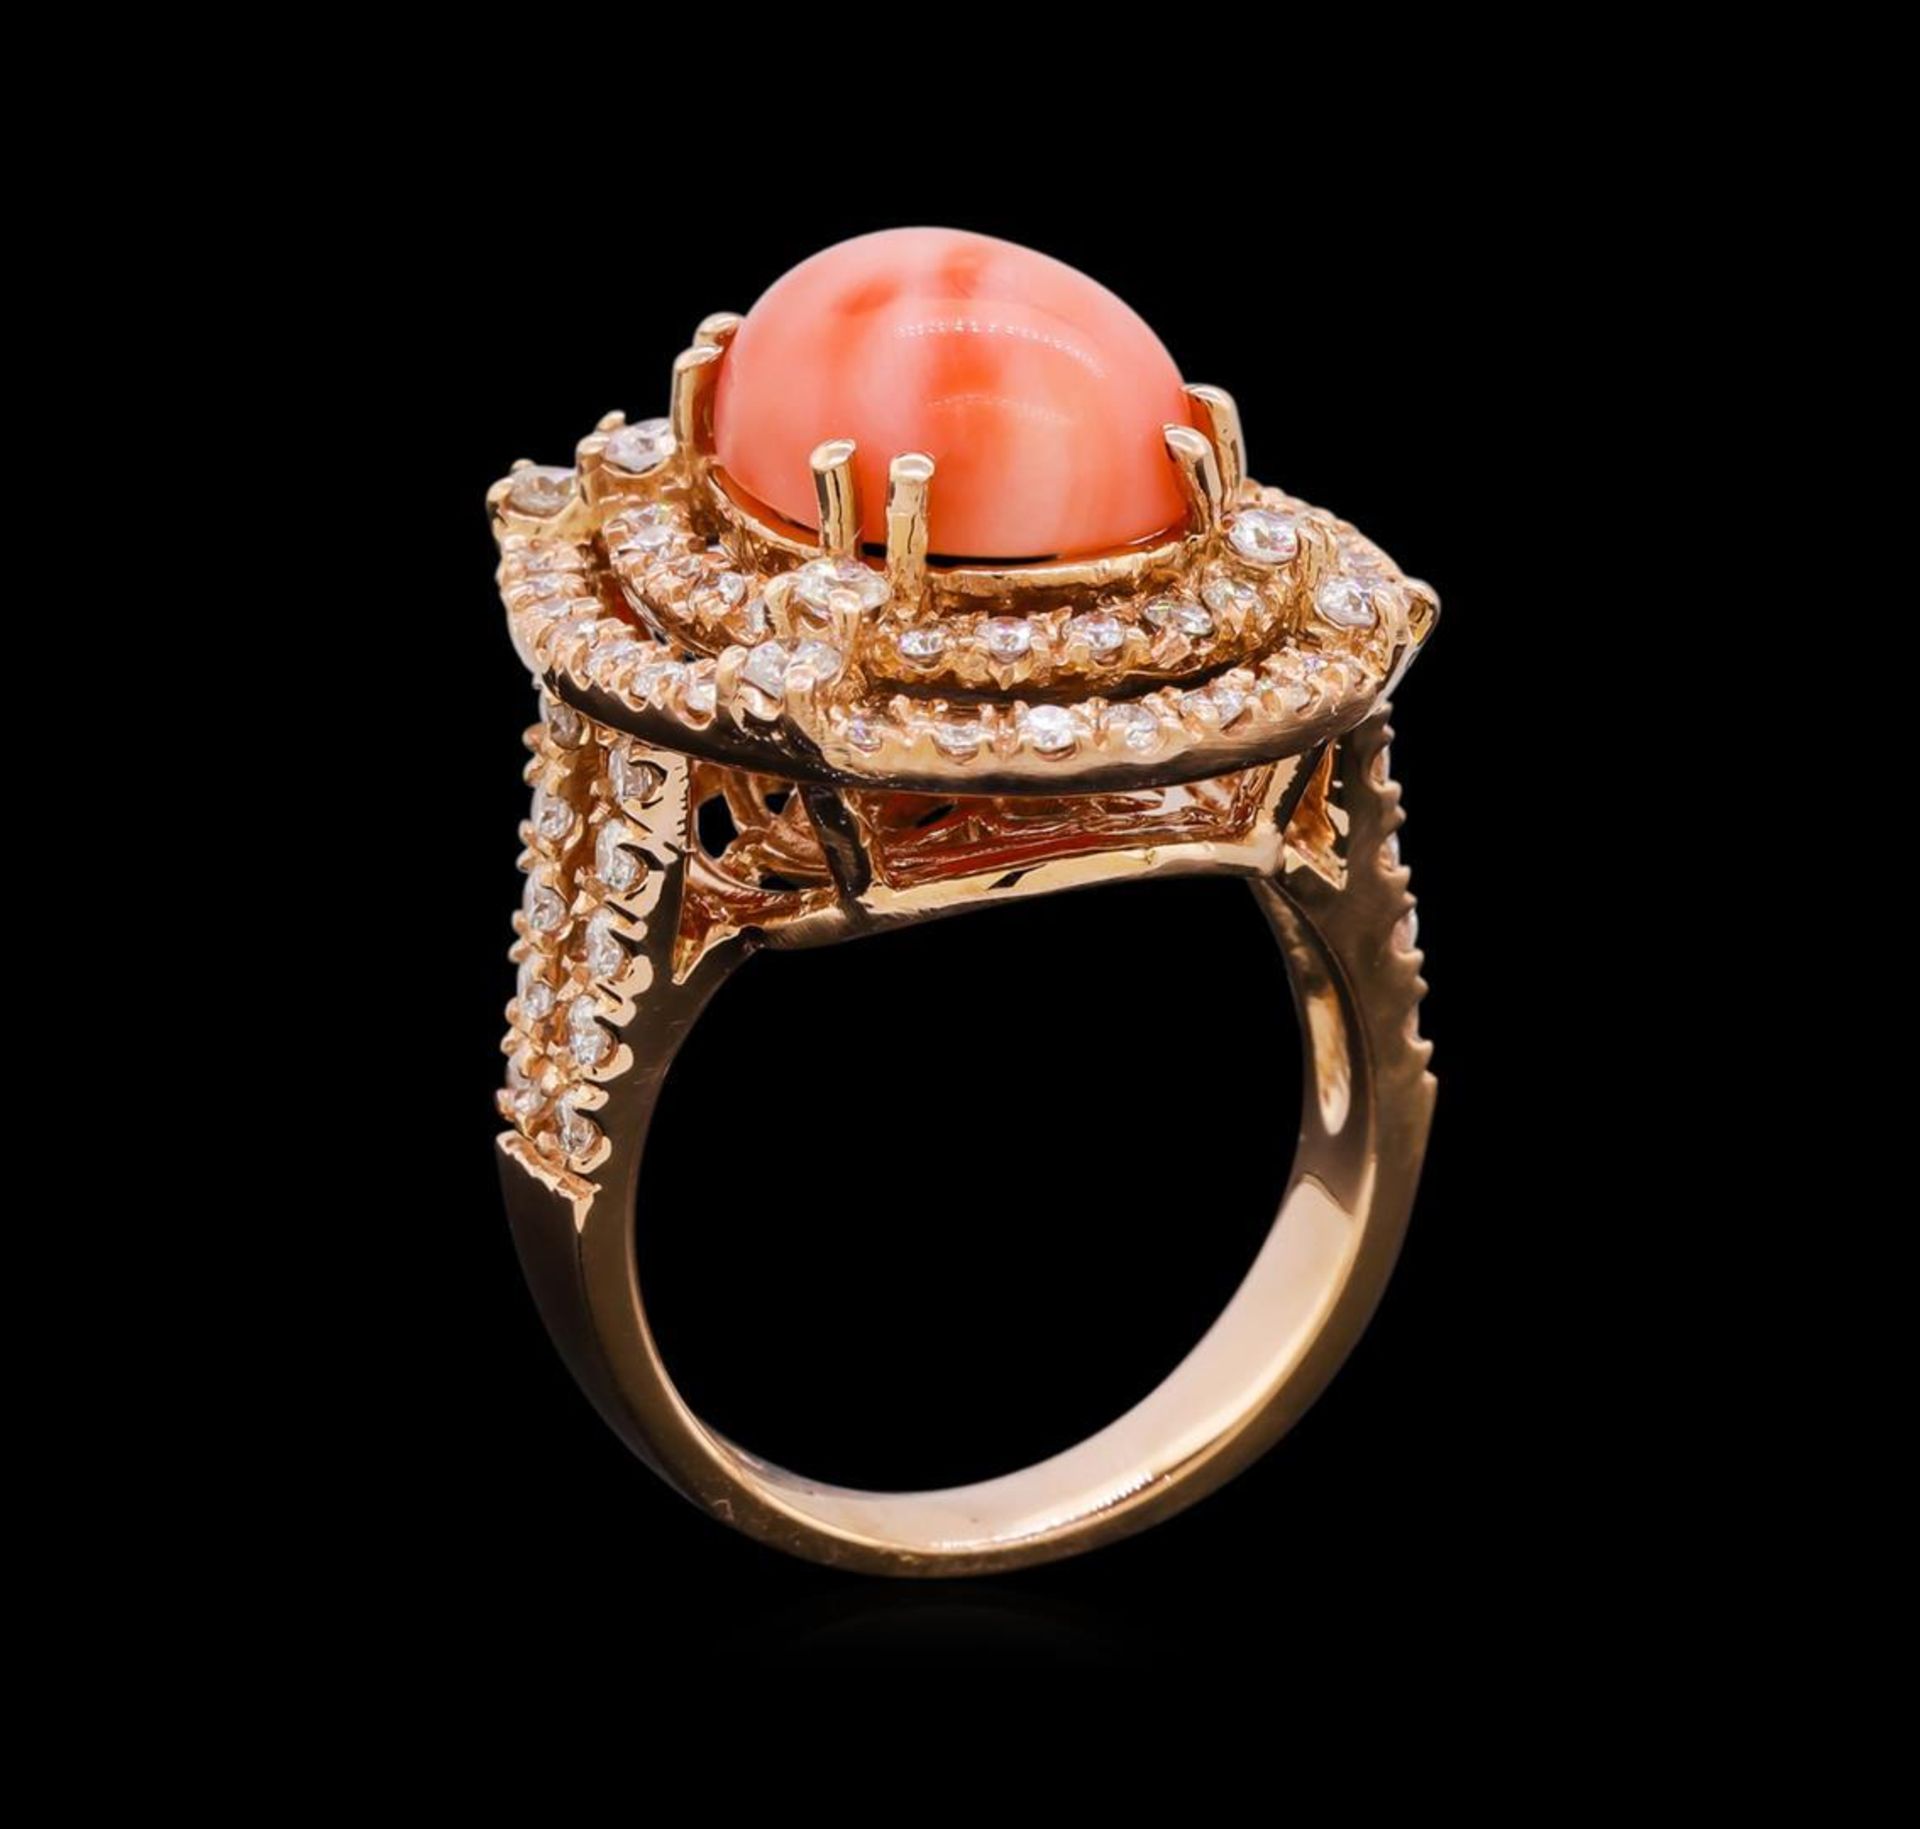 5.89 ctw Pink Coral and Diamond Ring - 14KT Rose Gold - Image 4 of 6